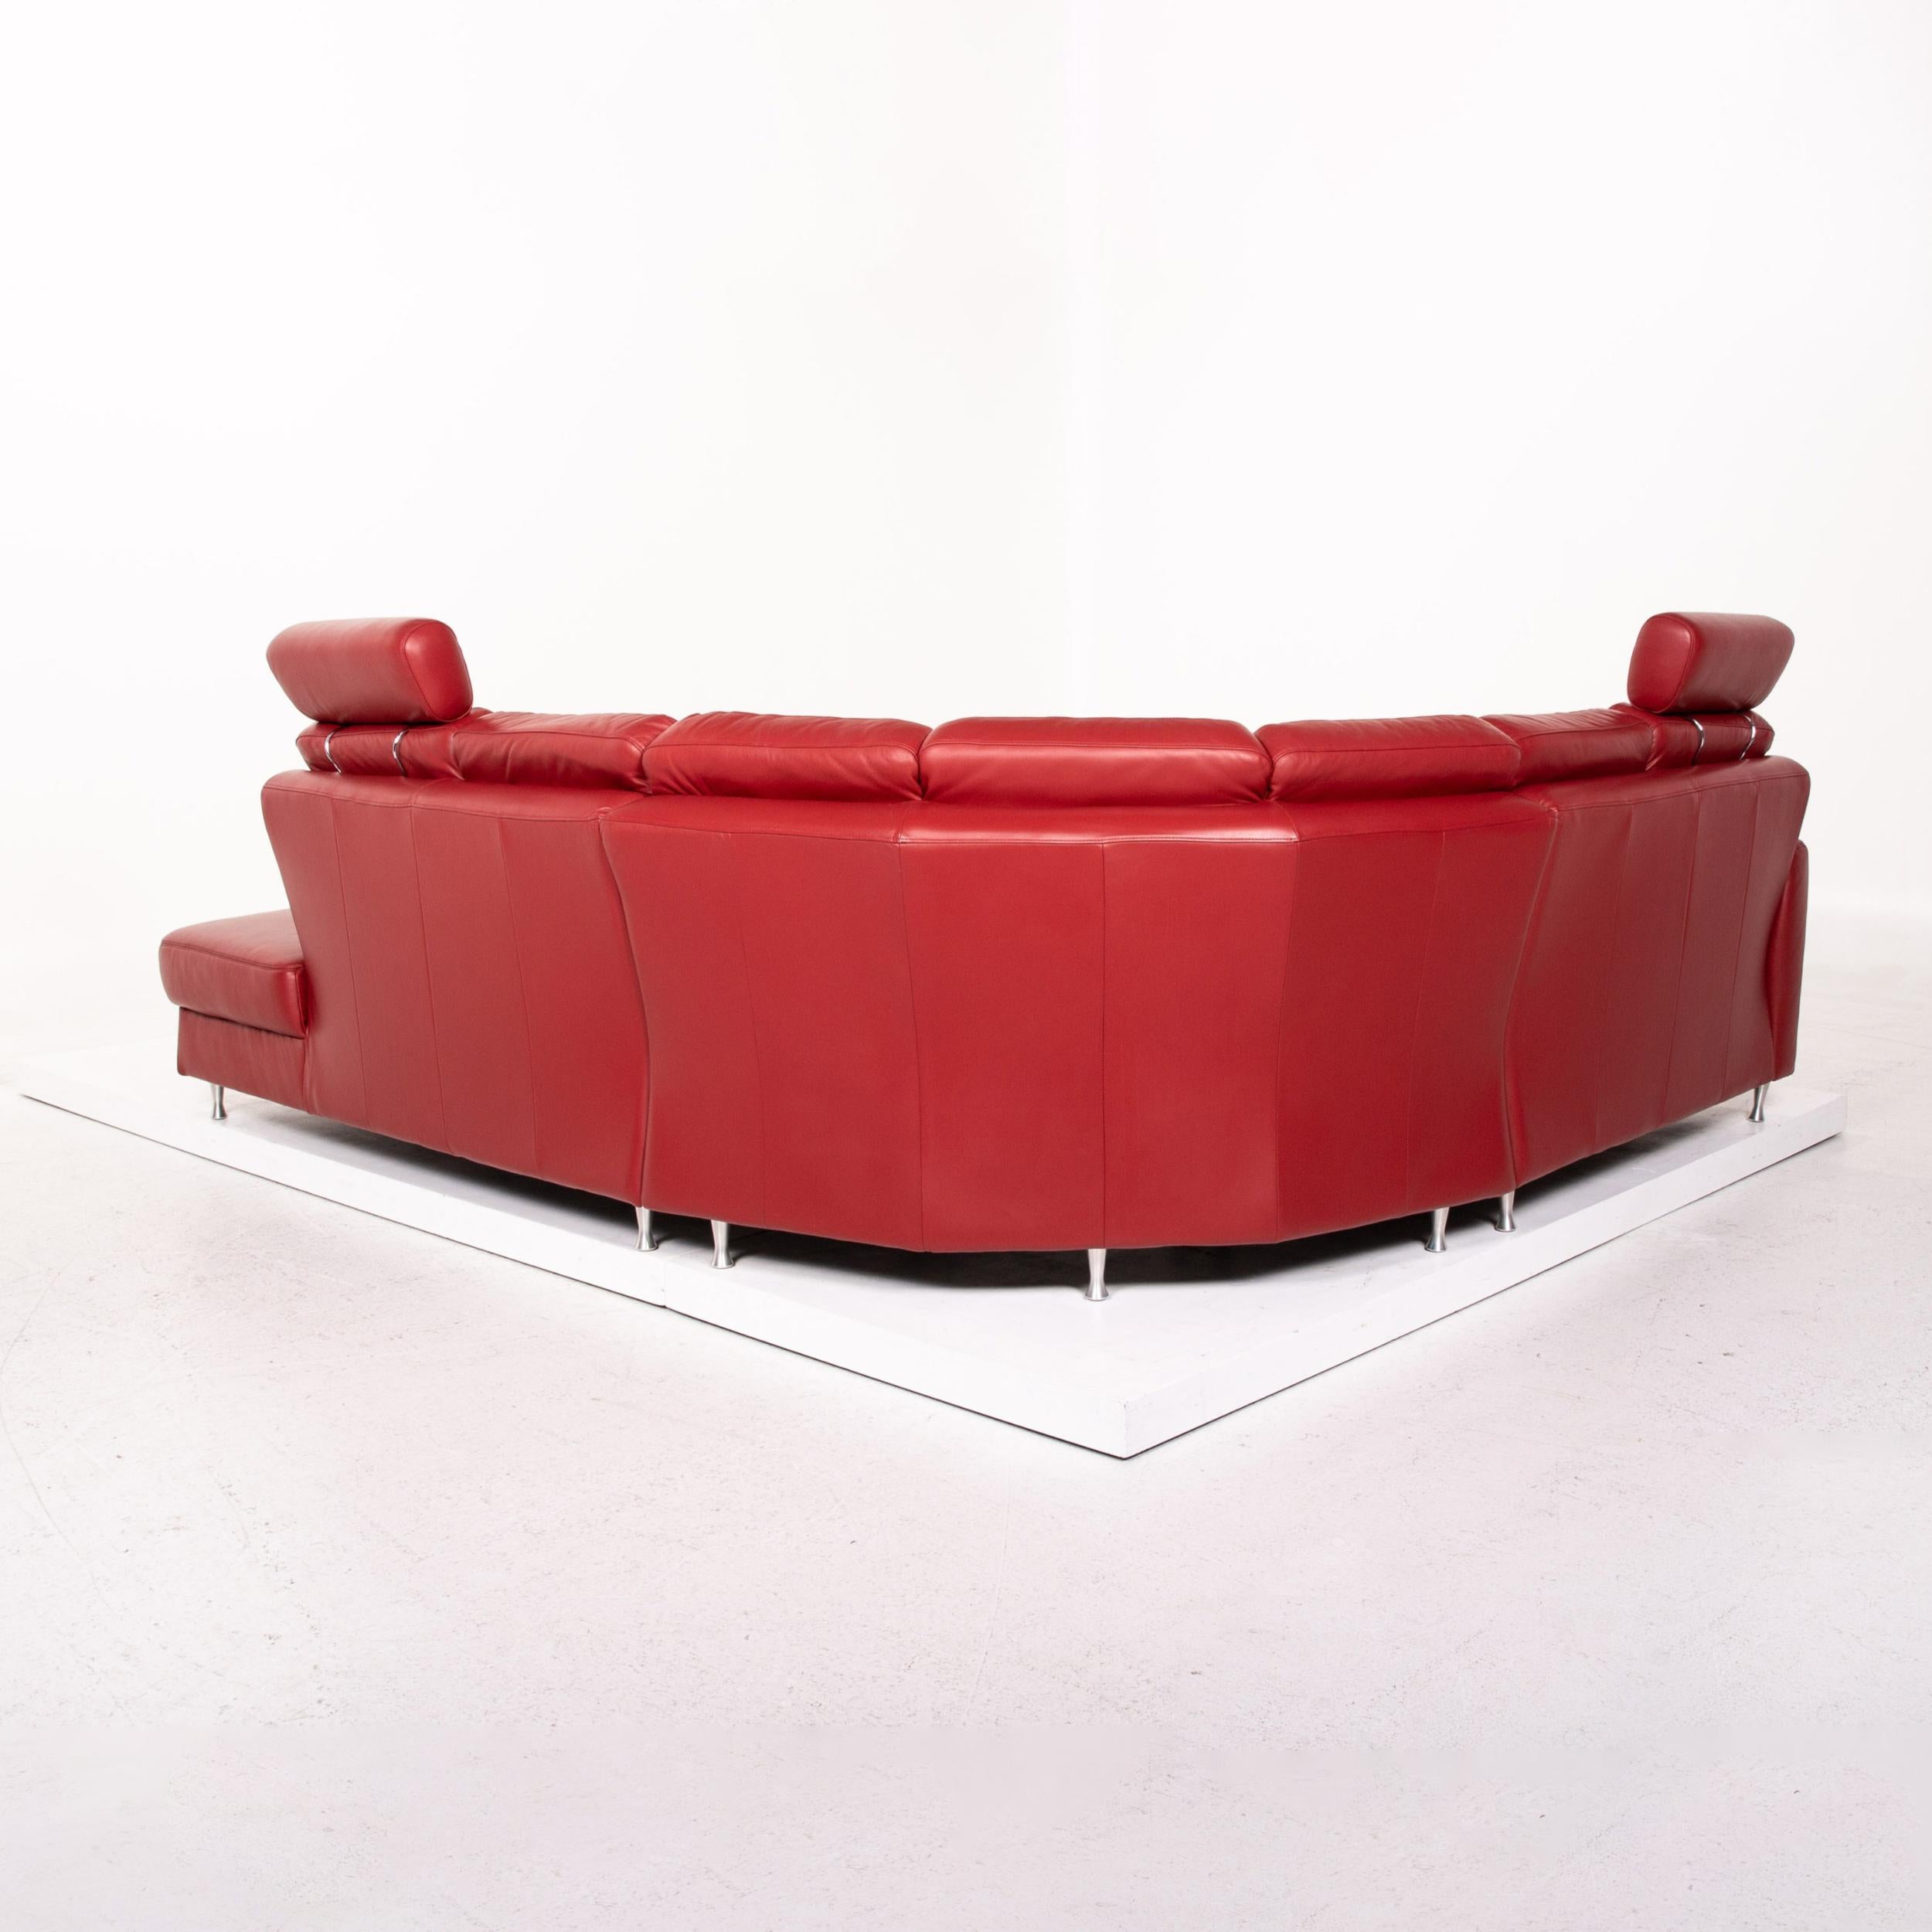 Sample Ring Leather Corner Sofa Red Dark Red Sofa Function Couch For Sale 5